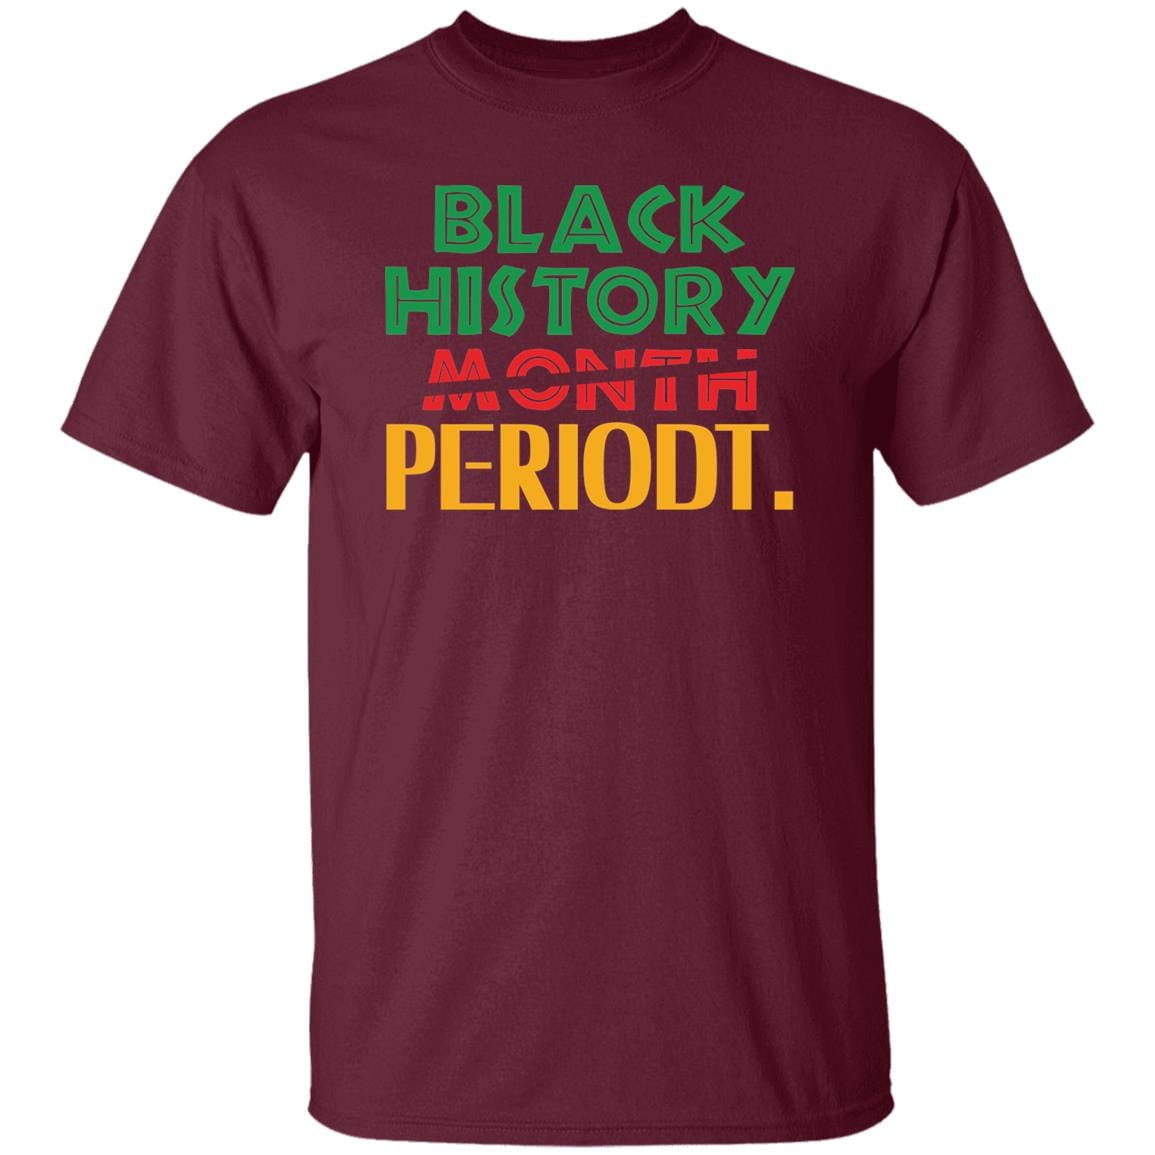 Black History Month Periodt. T-shirt Apparel Gearment Unisex Tee Maroon S